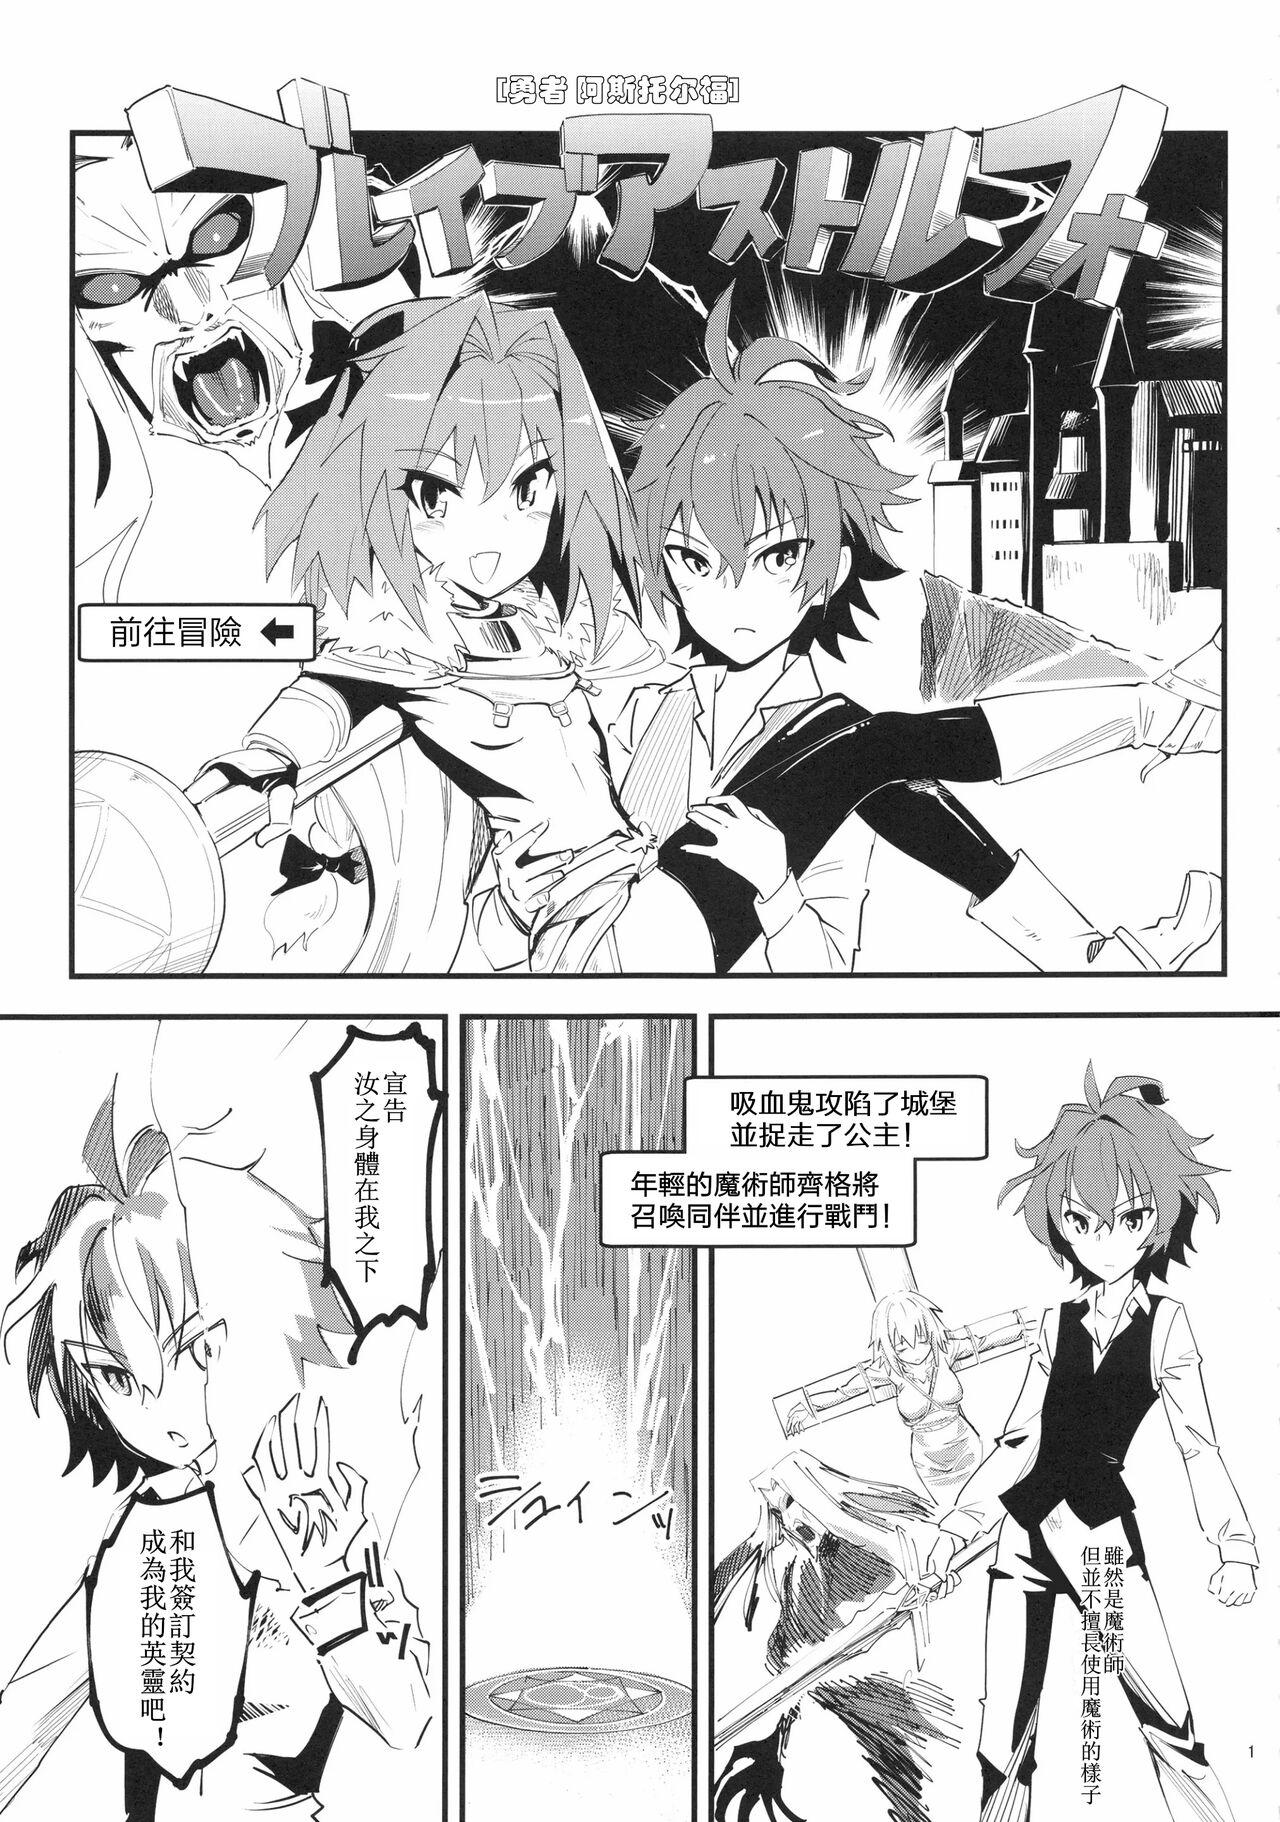 Movies CLASS CHANGE!! Brave Astolfo - Fate apocrypha Gay - Page 3